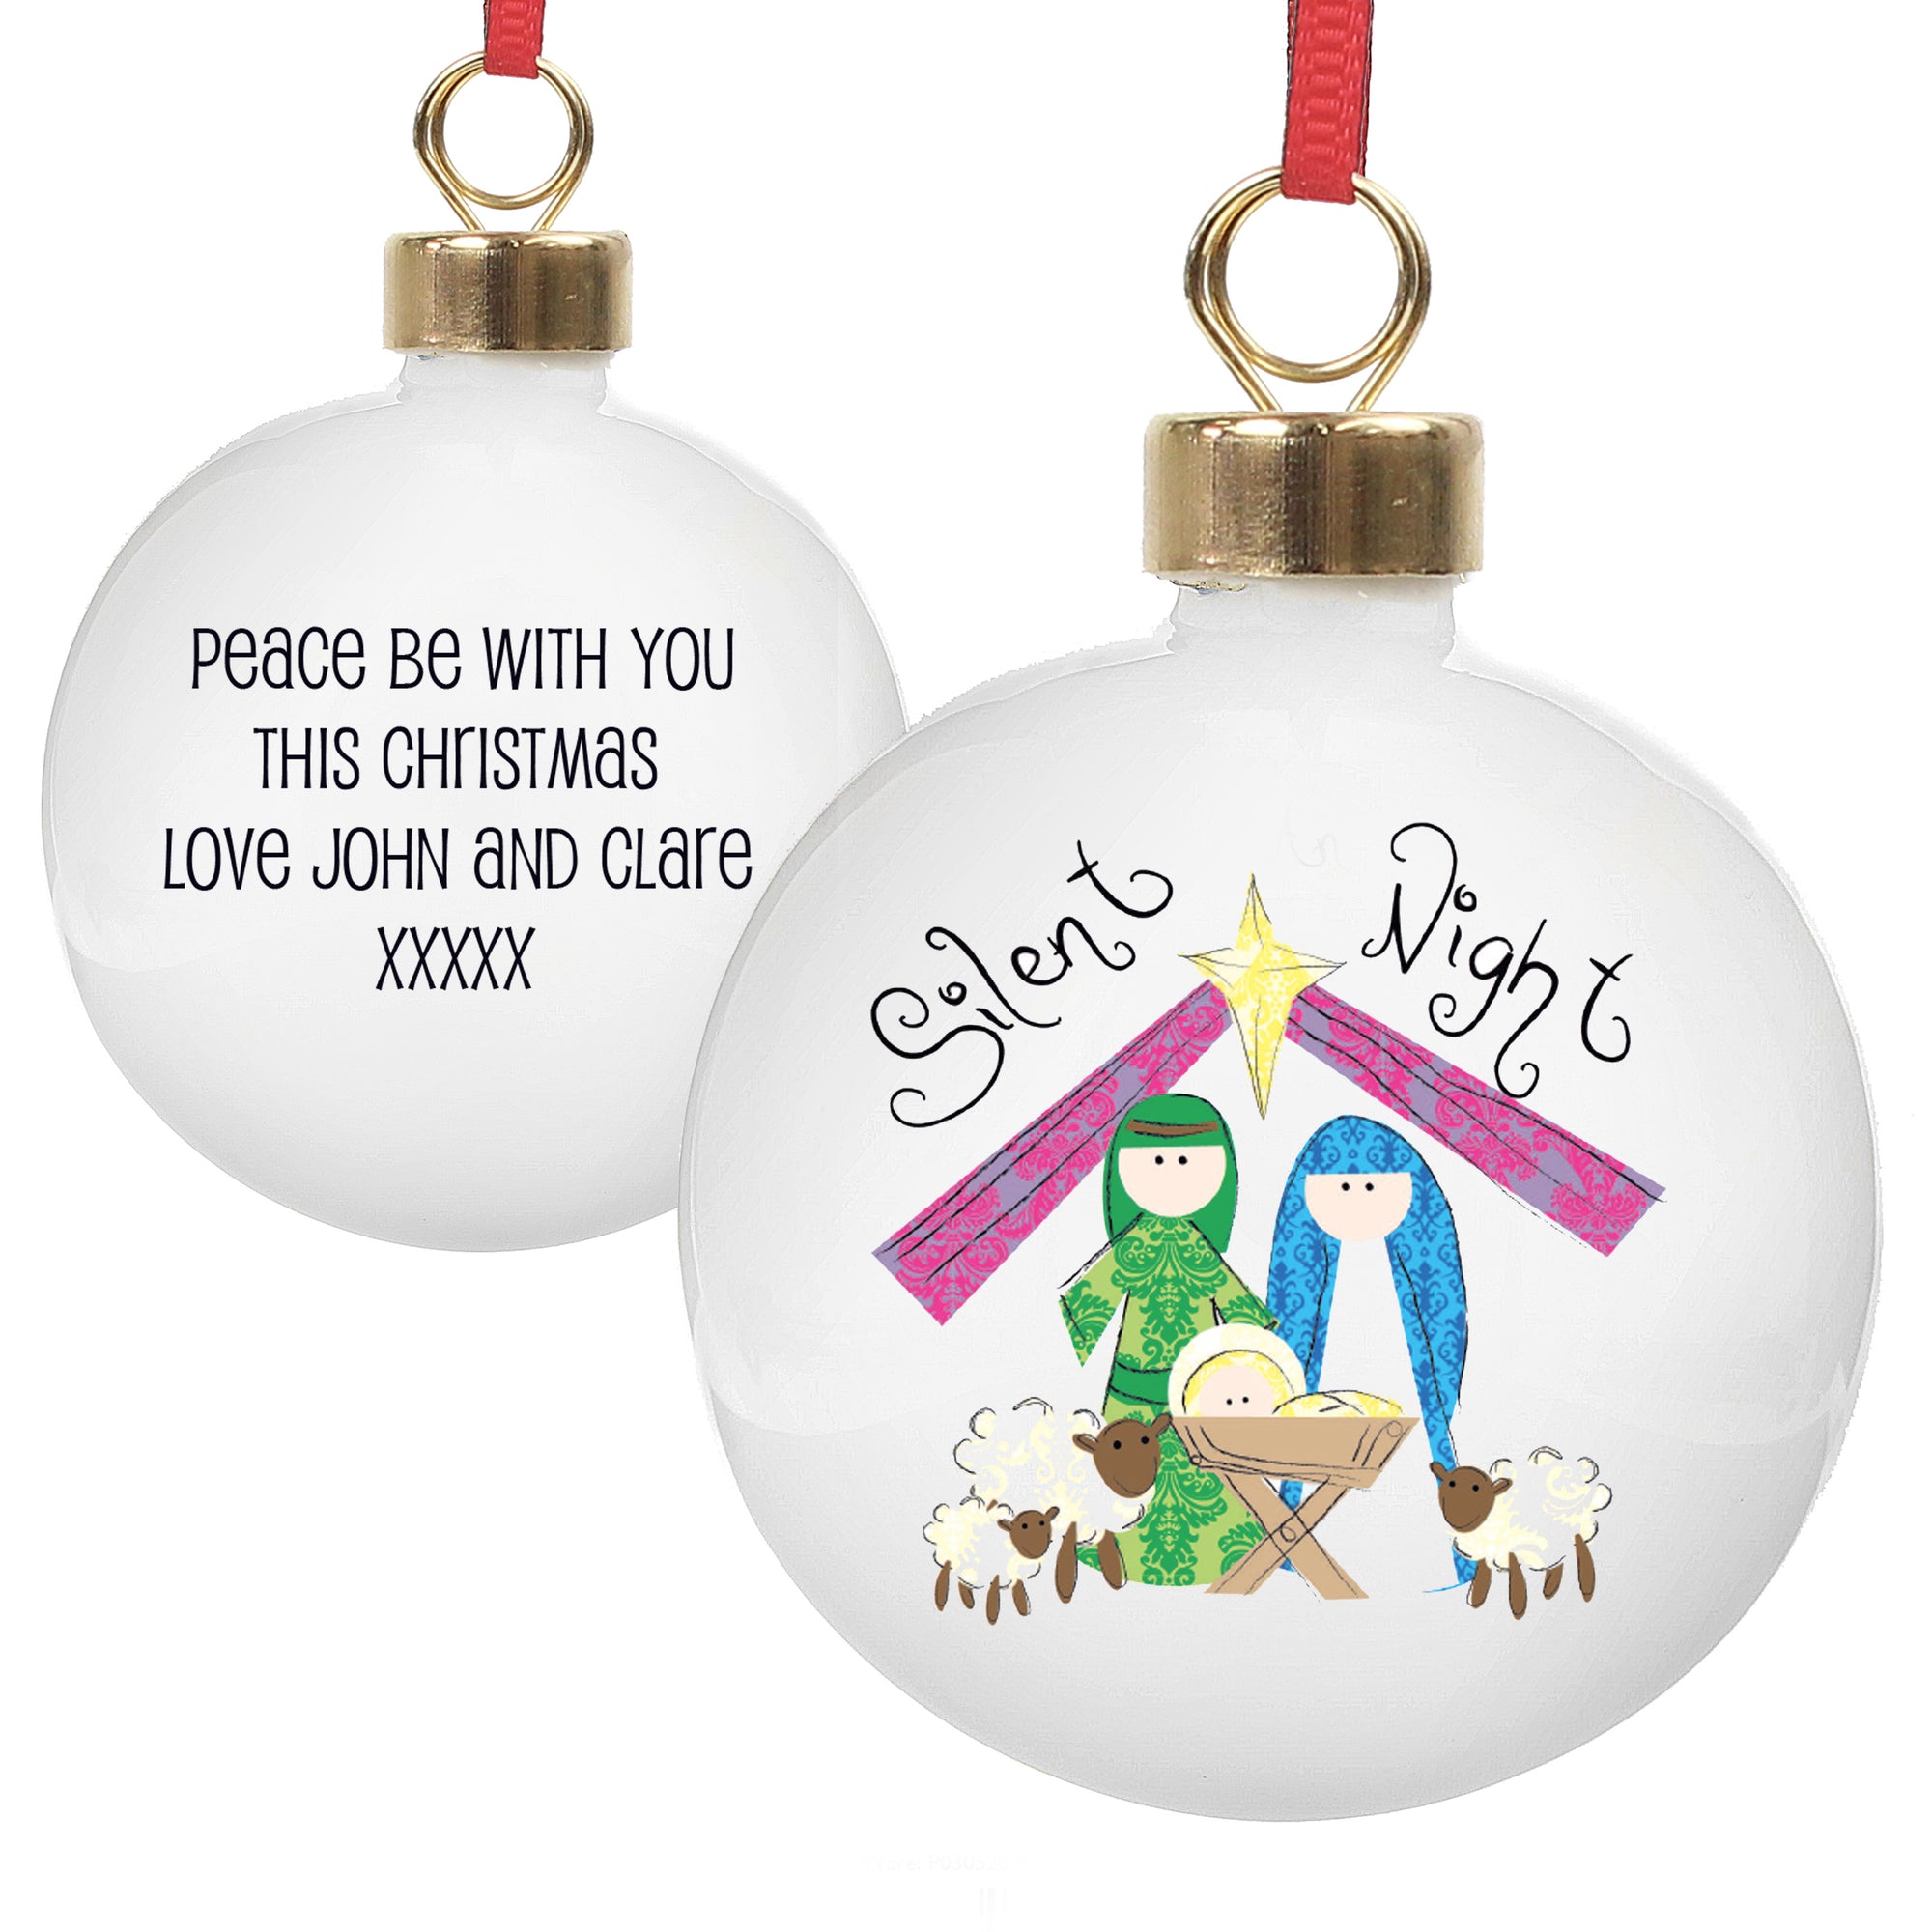 Personalised White Ceramic Christmas Bauble featuring the text 'Silent Night' and a hand drawn nativity scene.  The rear of the bauble can be personalised with your own message over 4 lines.